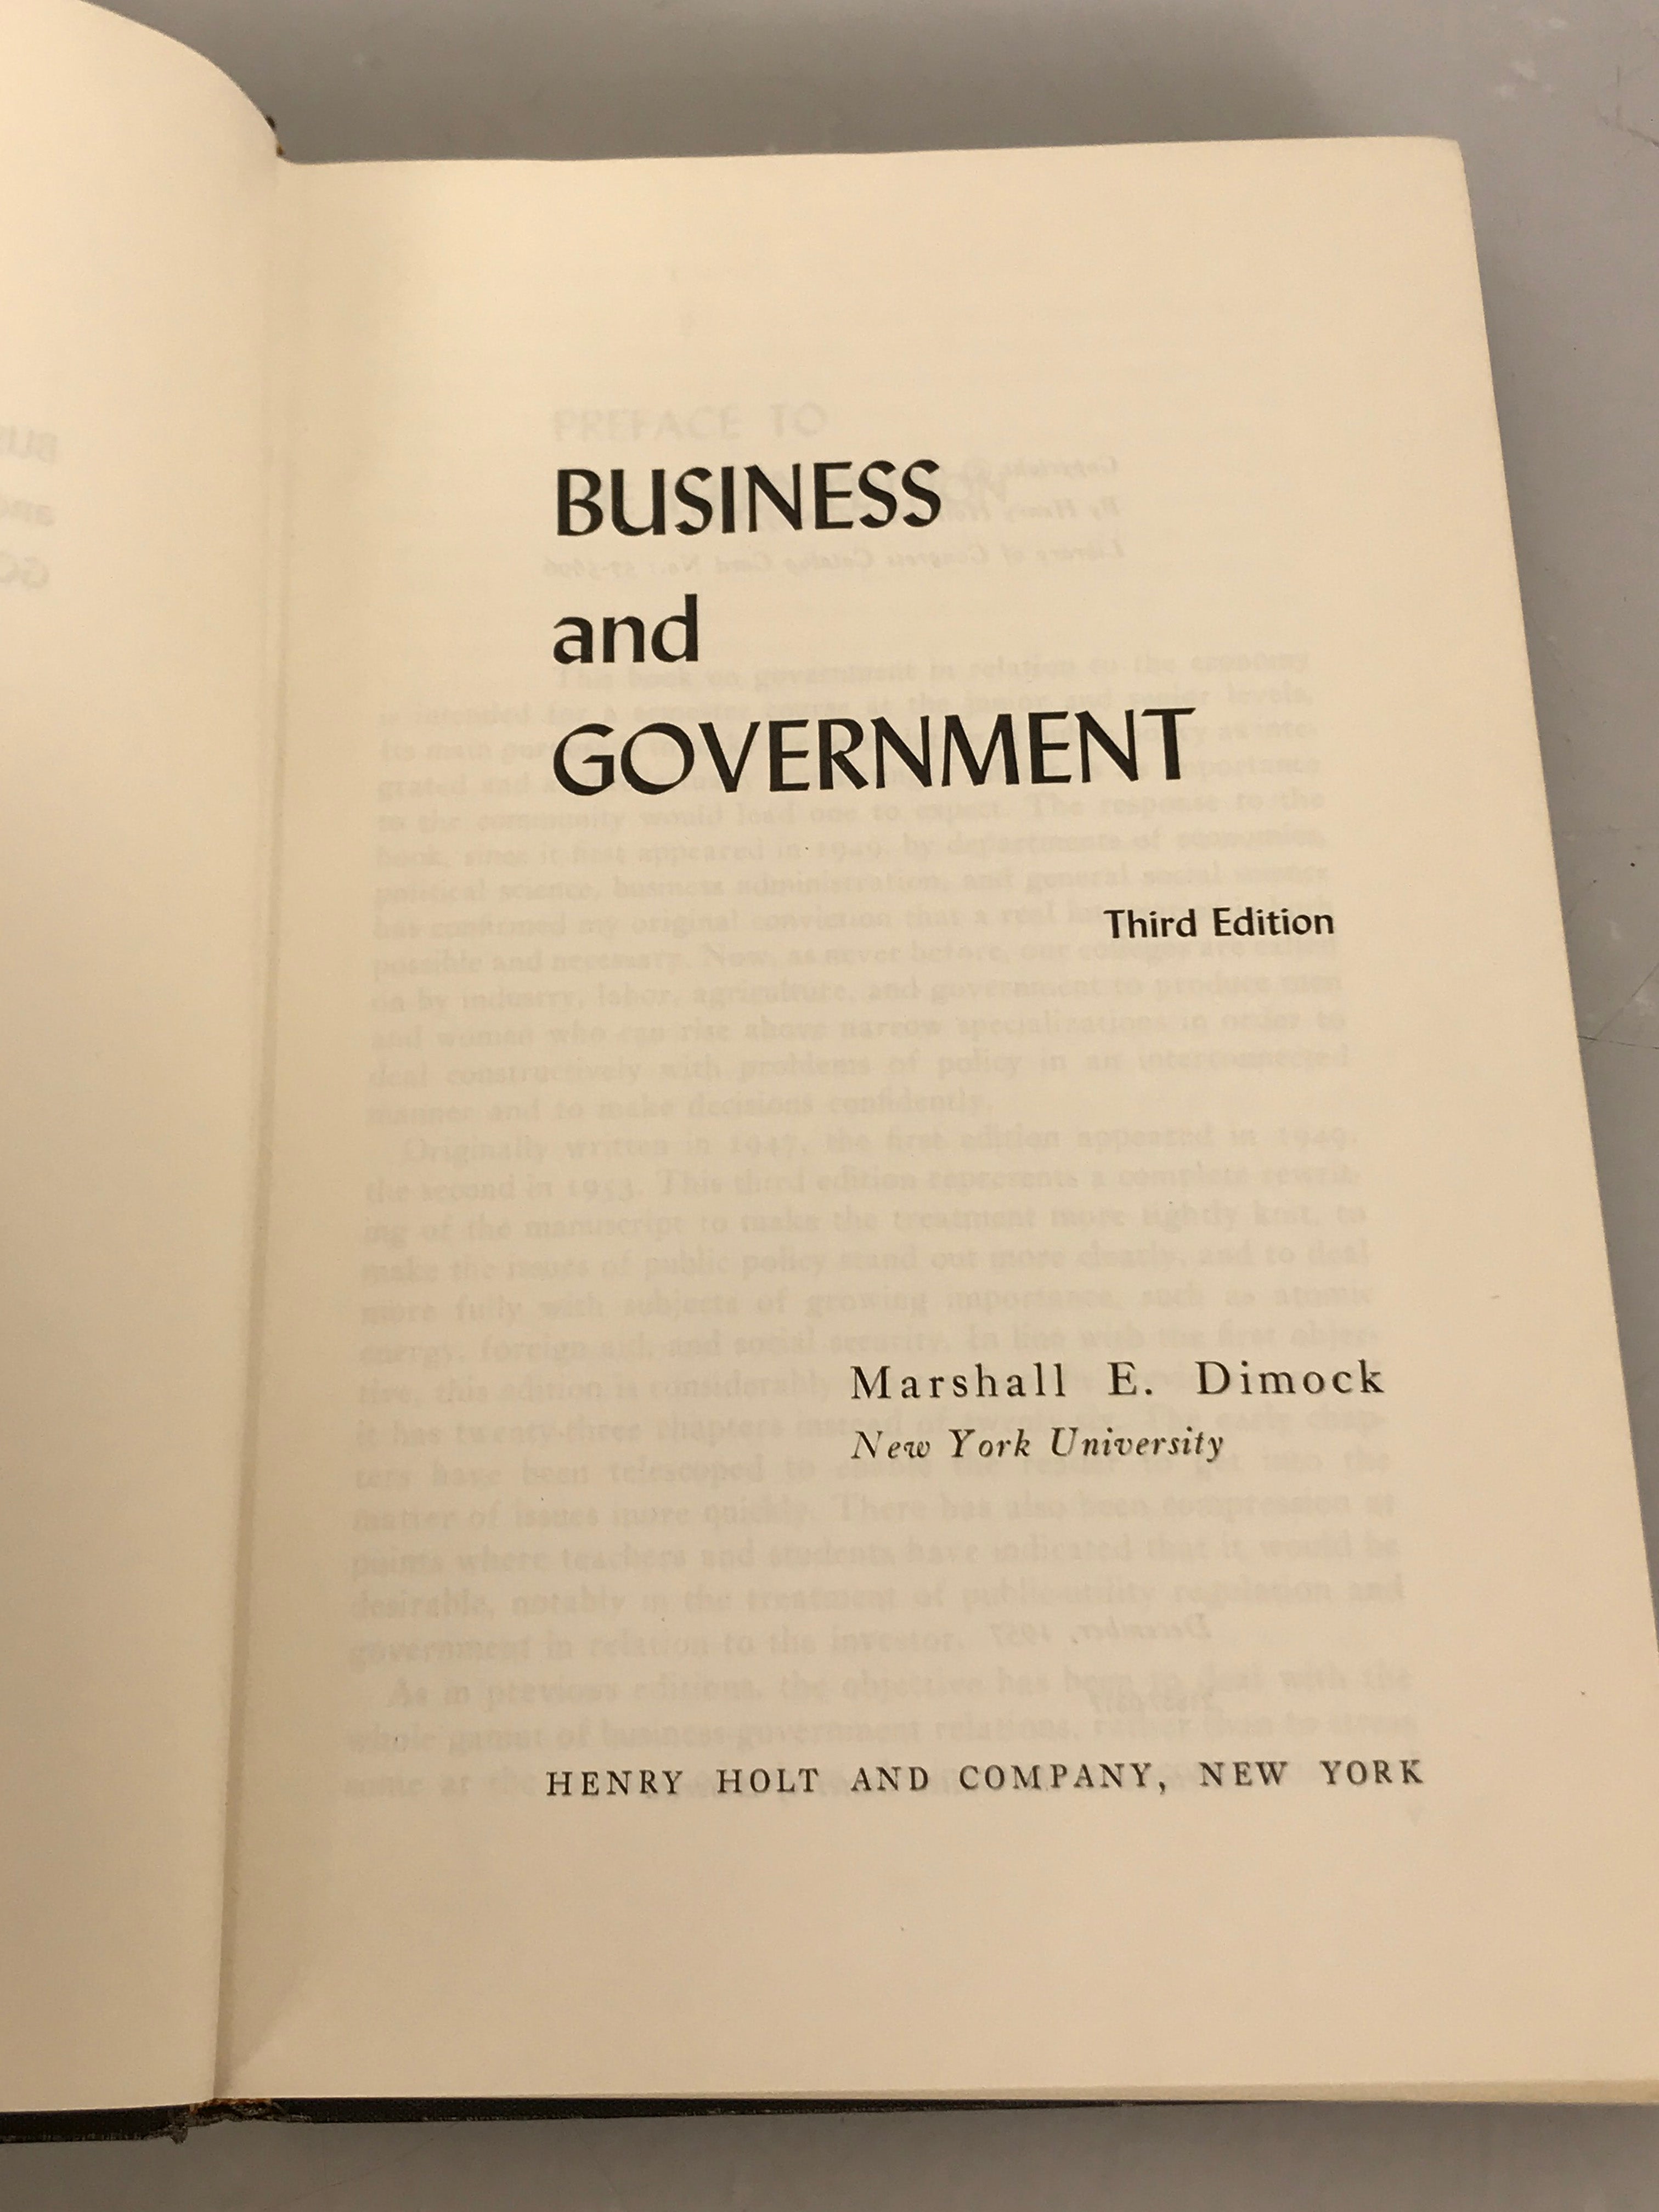 Business and Government by Marshall Dimock Third Edition 1957 HC